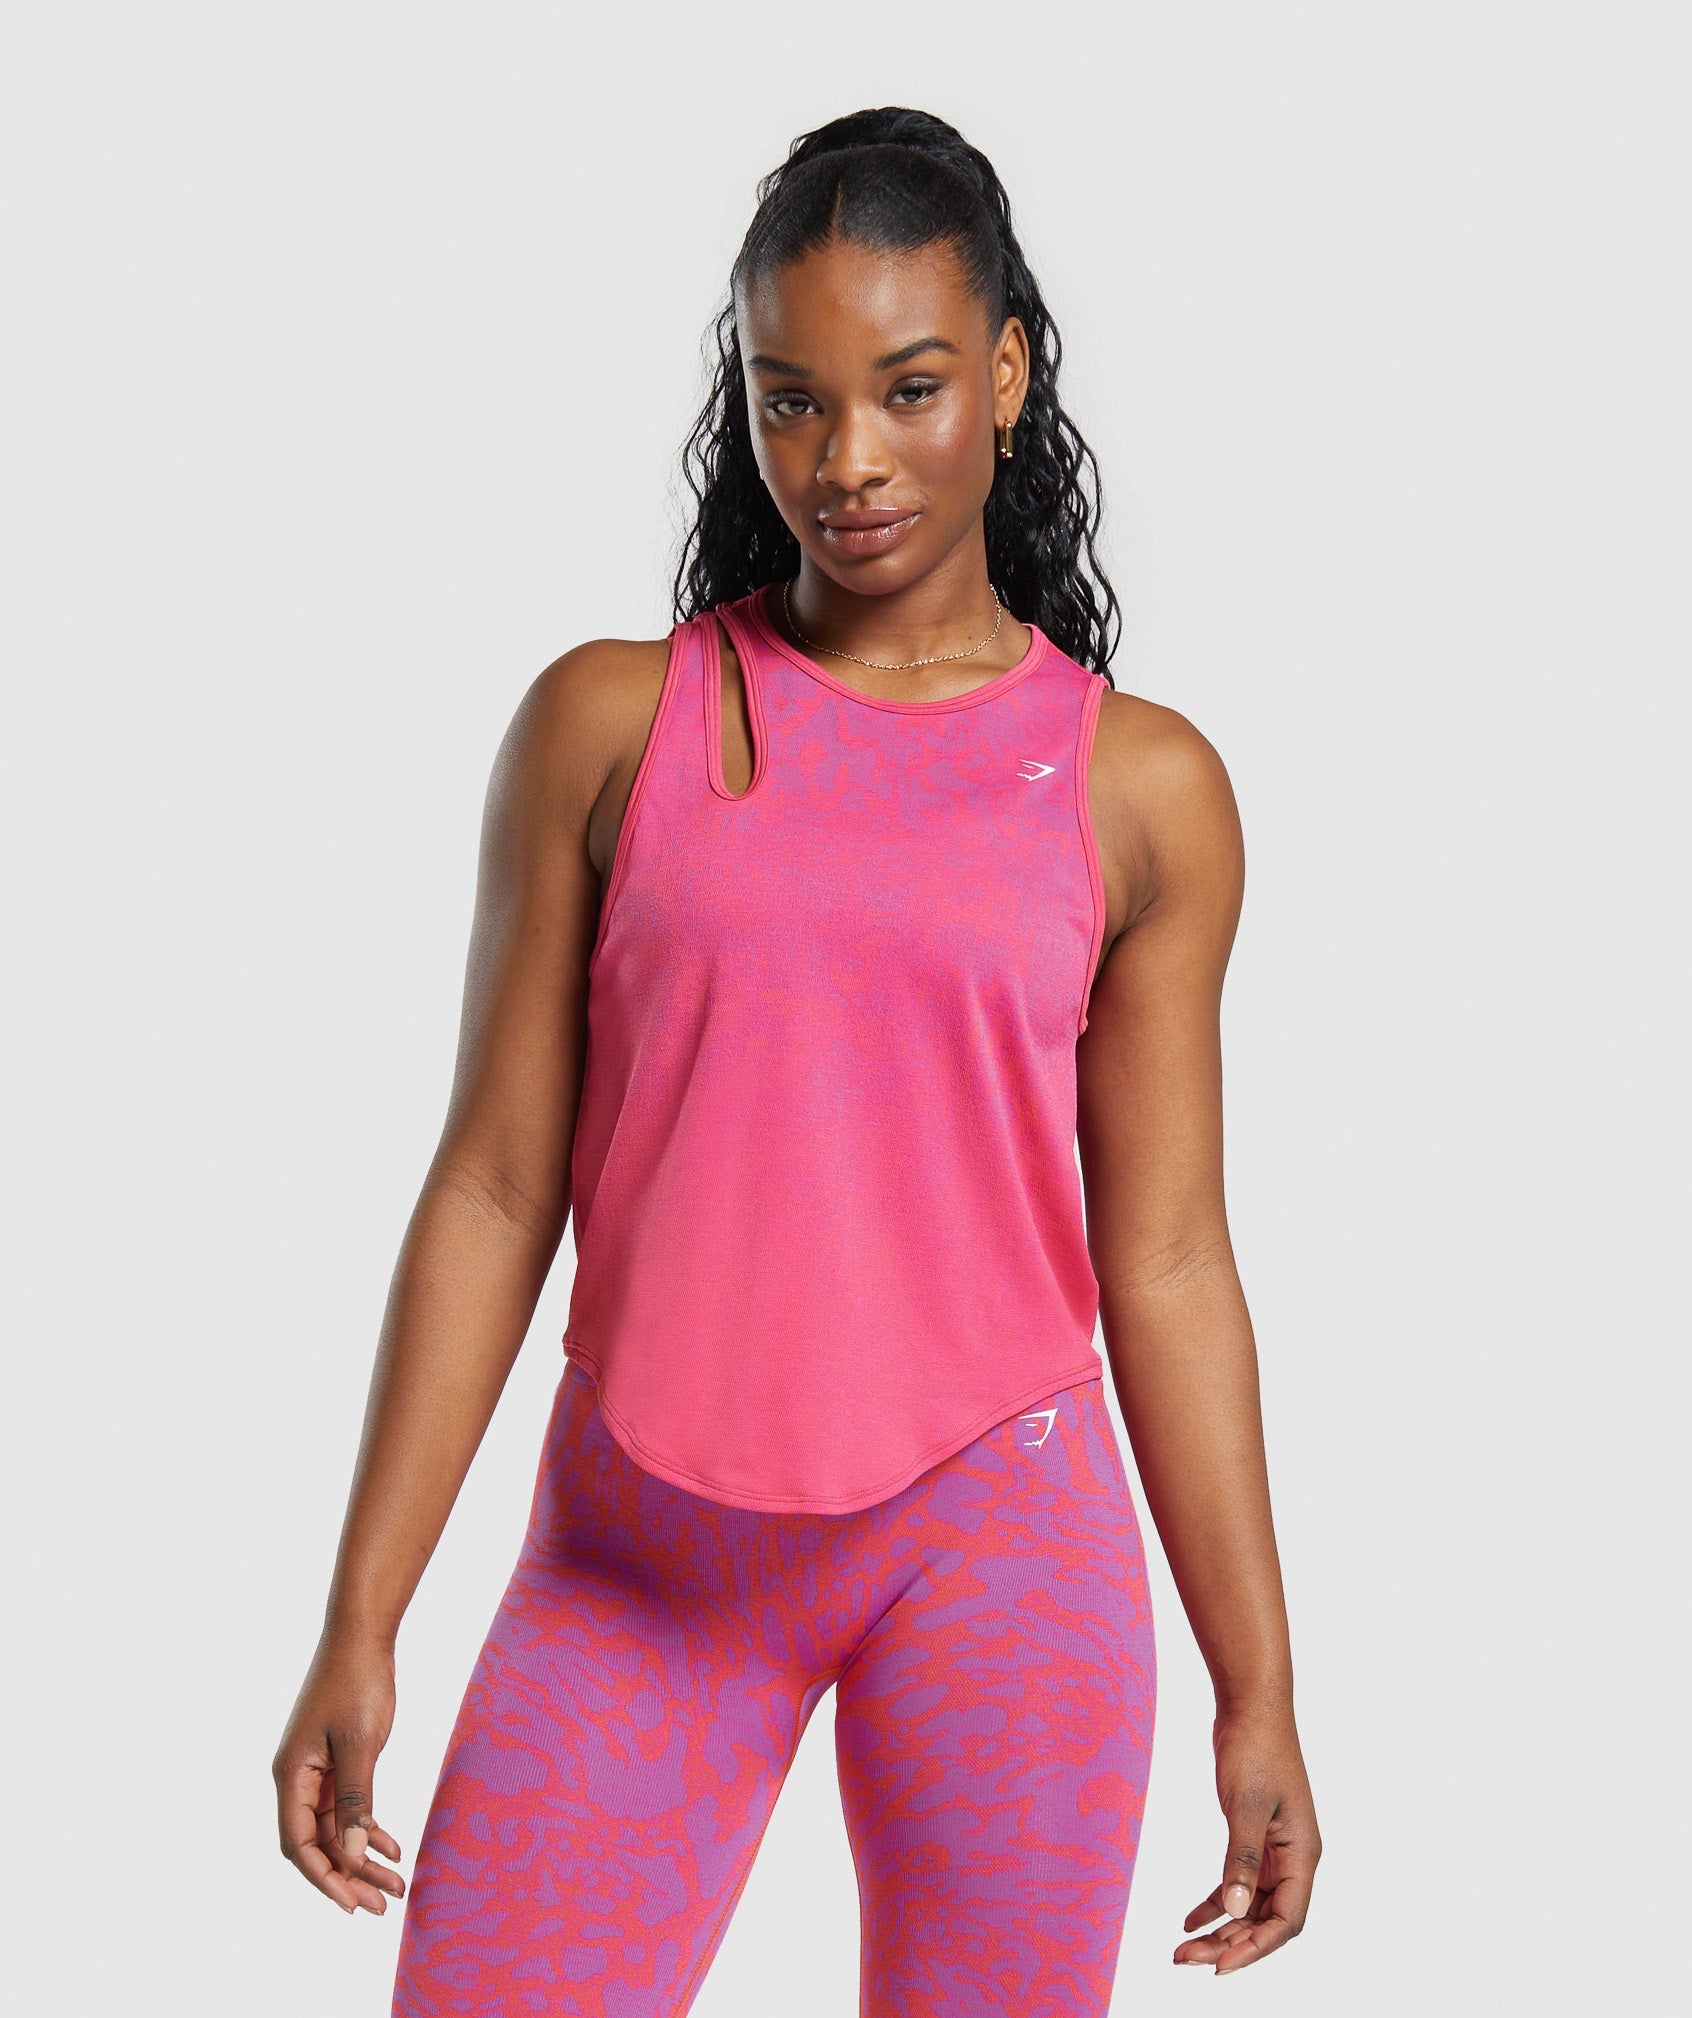 Adapt Safari Seamless Drop Arm Faded Tank in Shelly Pink/Fly Coral